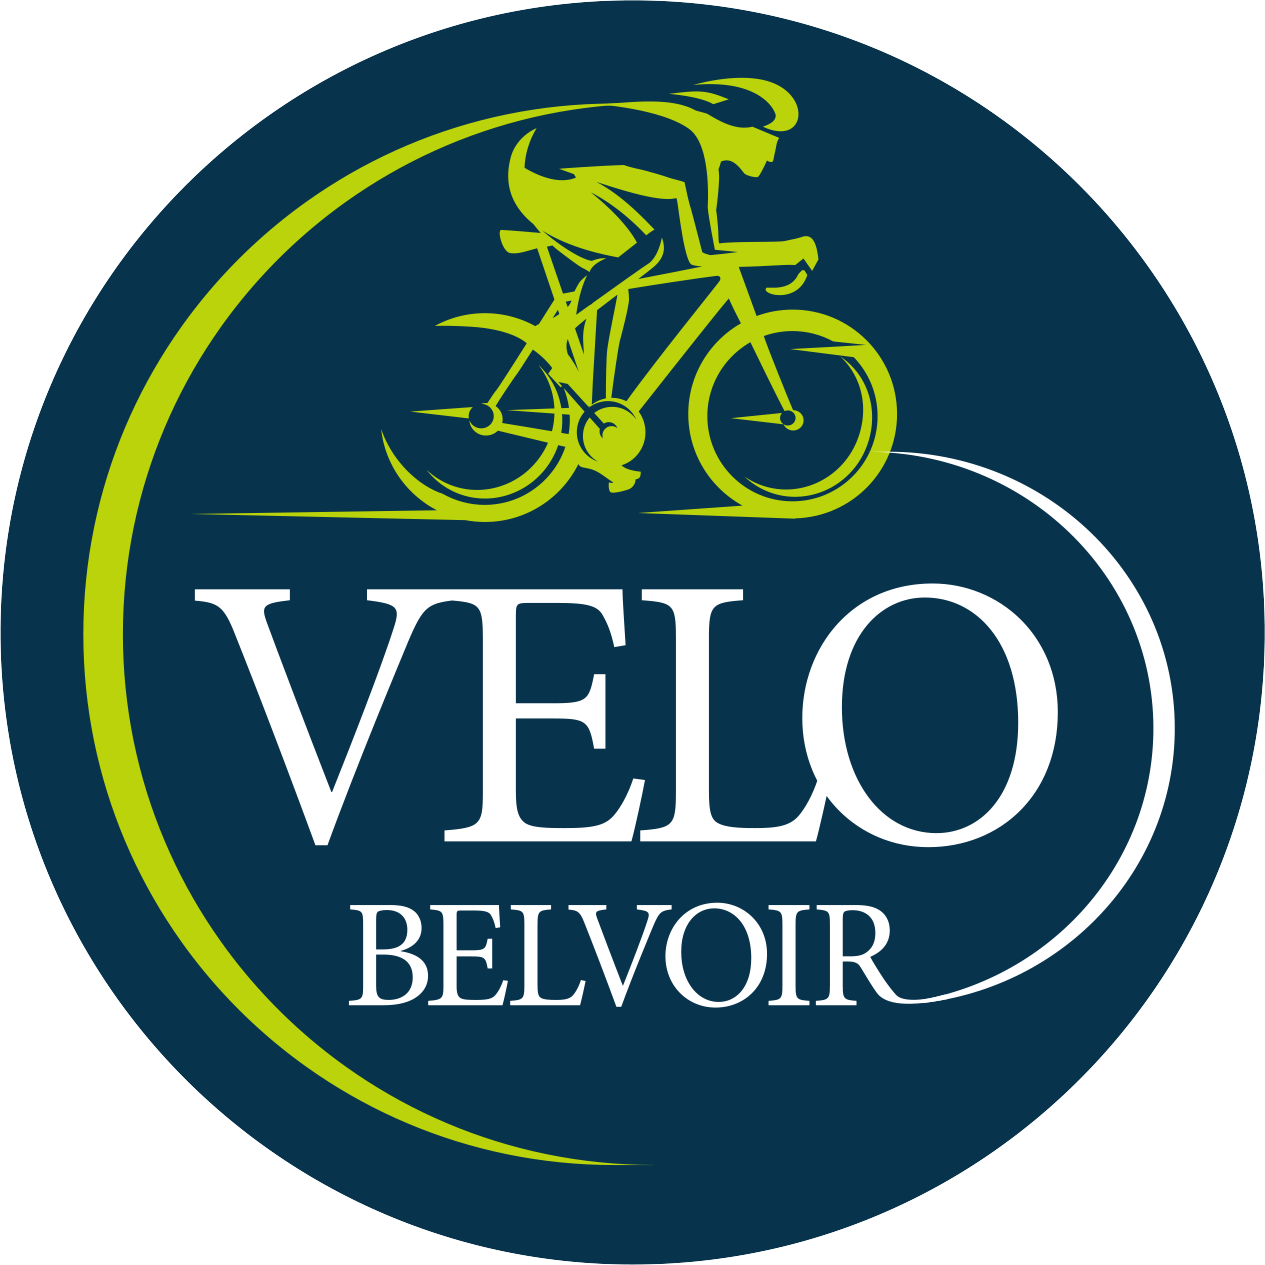 Velo Belvoir logo depicting a stylised cyclist